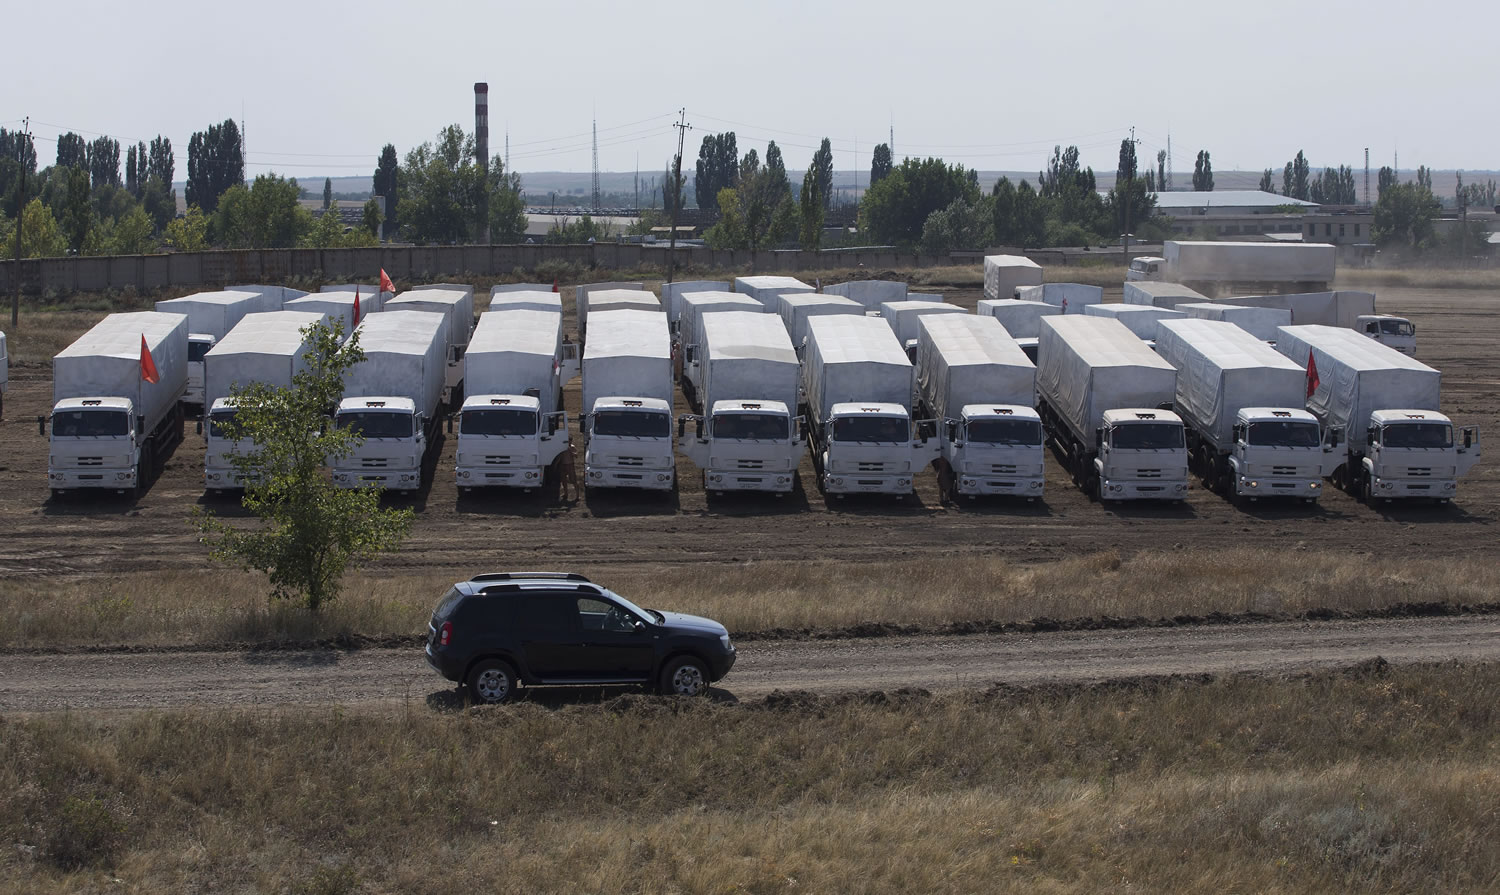 White trucks that Russia says contain humanitarian aid are parked in a field Thursday in Russia about 18 miles from Ukraine border.